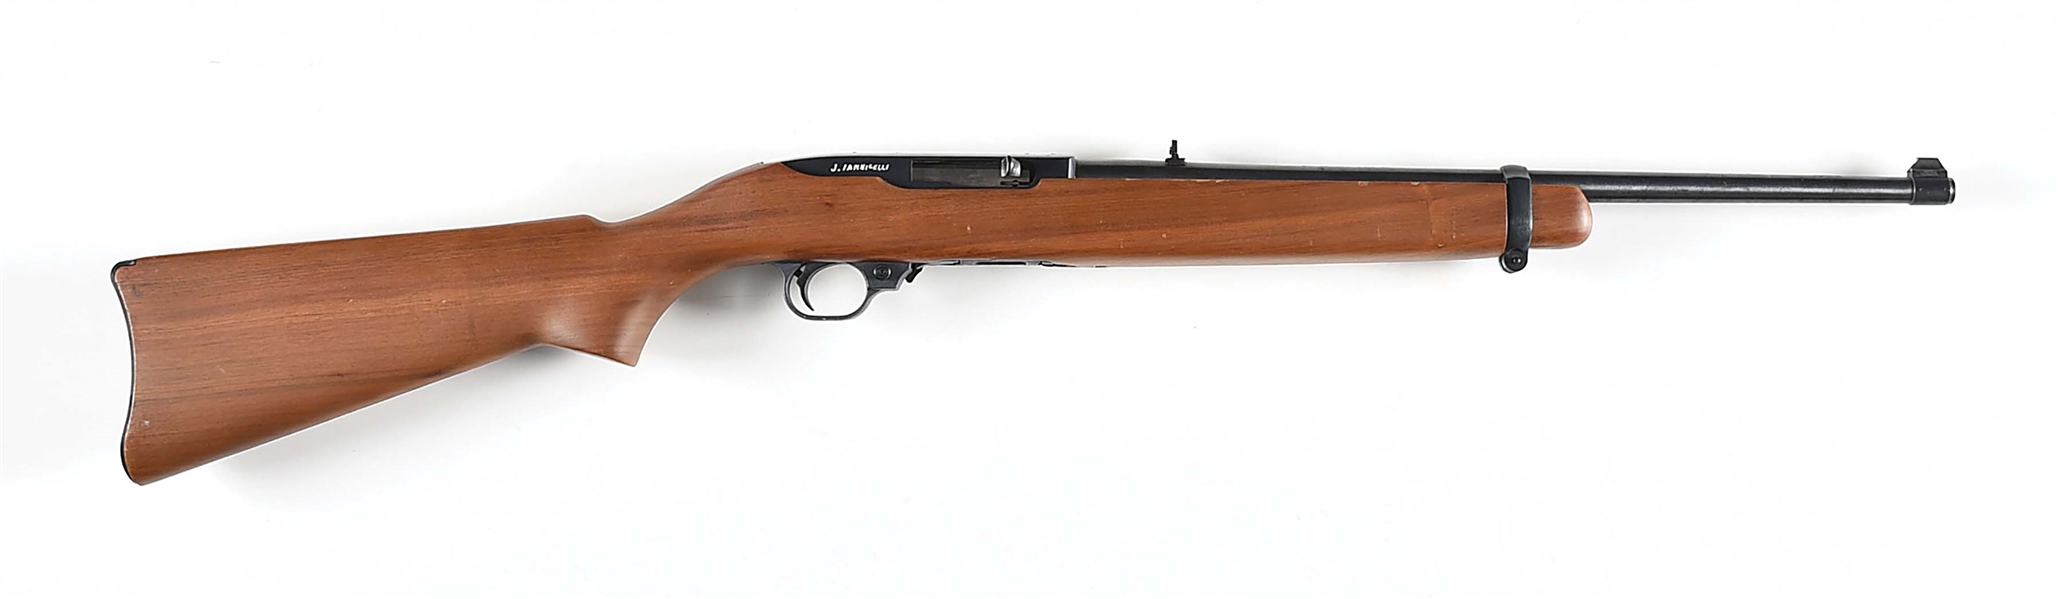 (C) RUGER 10/22 SEMI AUTOMATIC RIFLE.